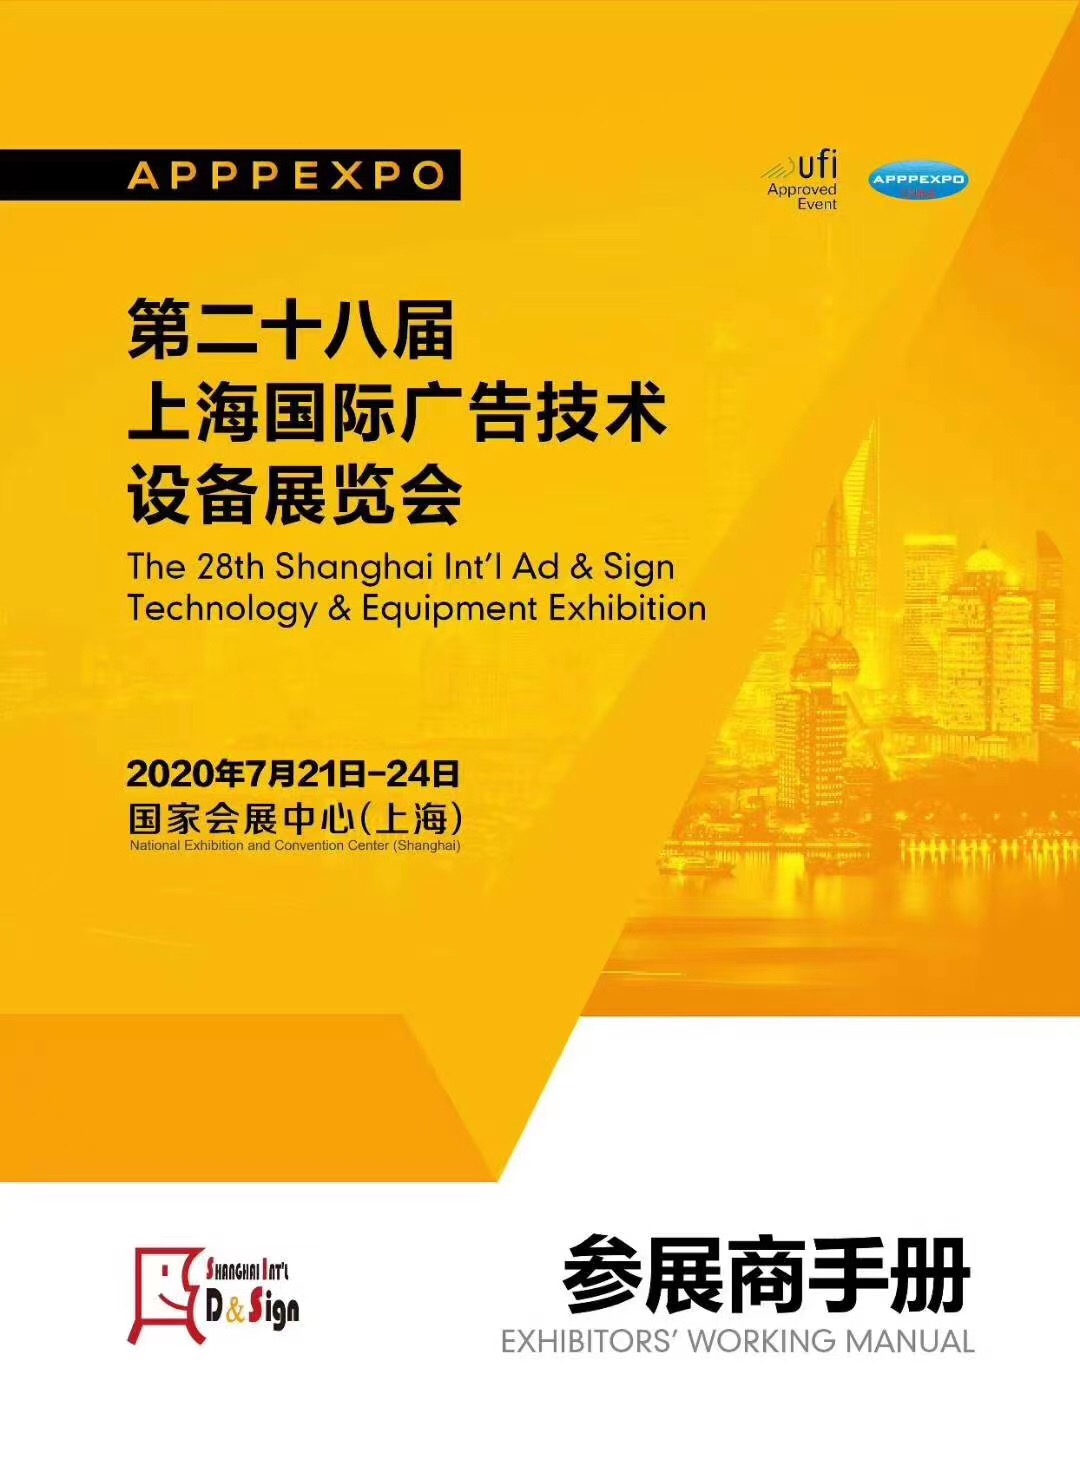 The 28th Shanghai International Exhibition of Advertising Technology and Equipment has come to a successful conclusion